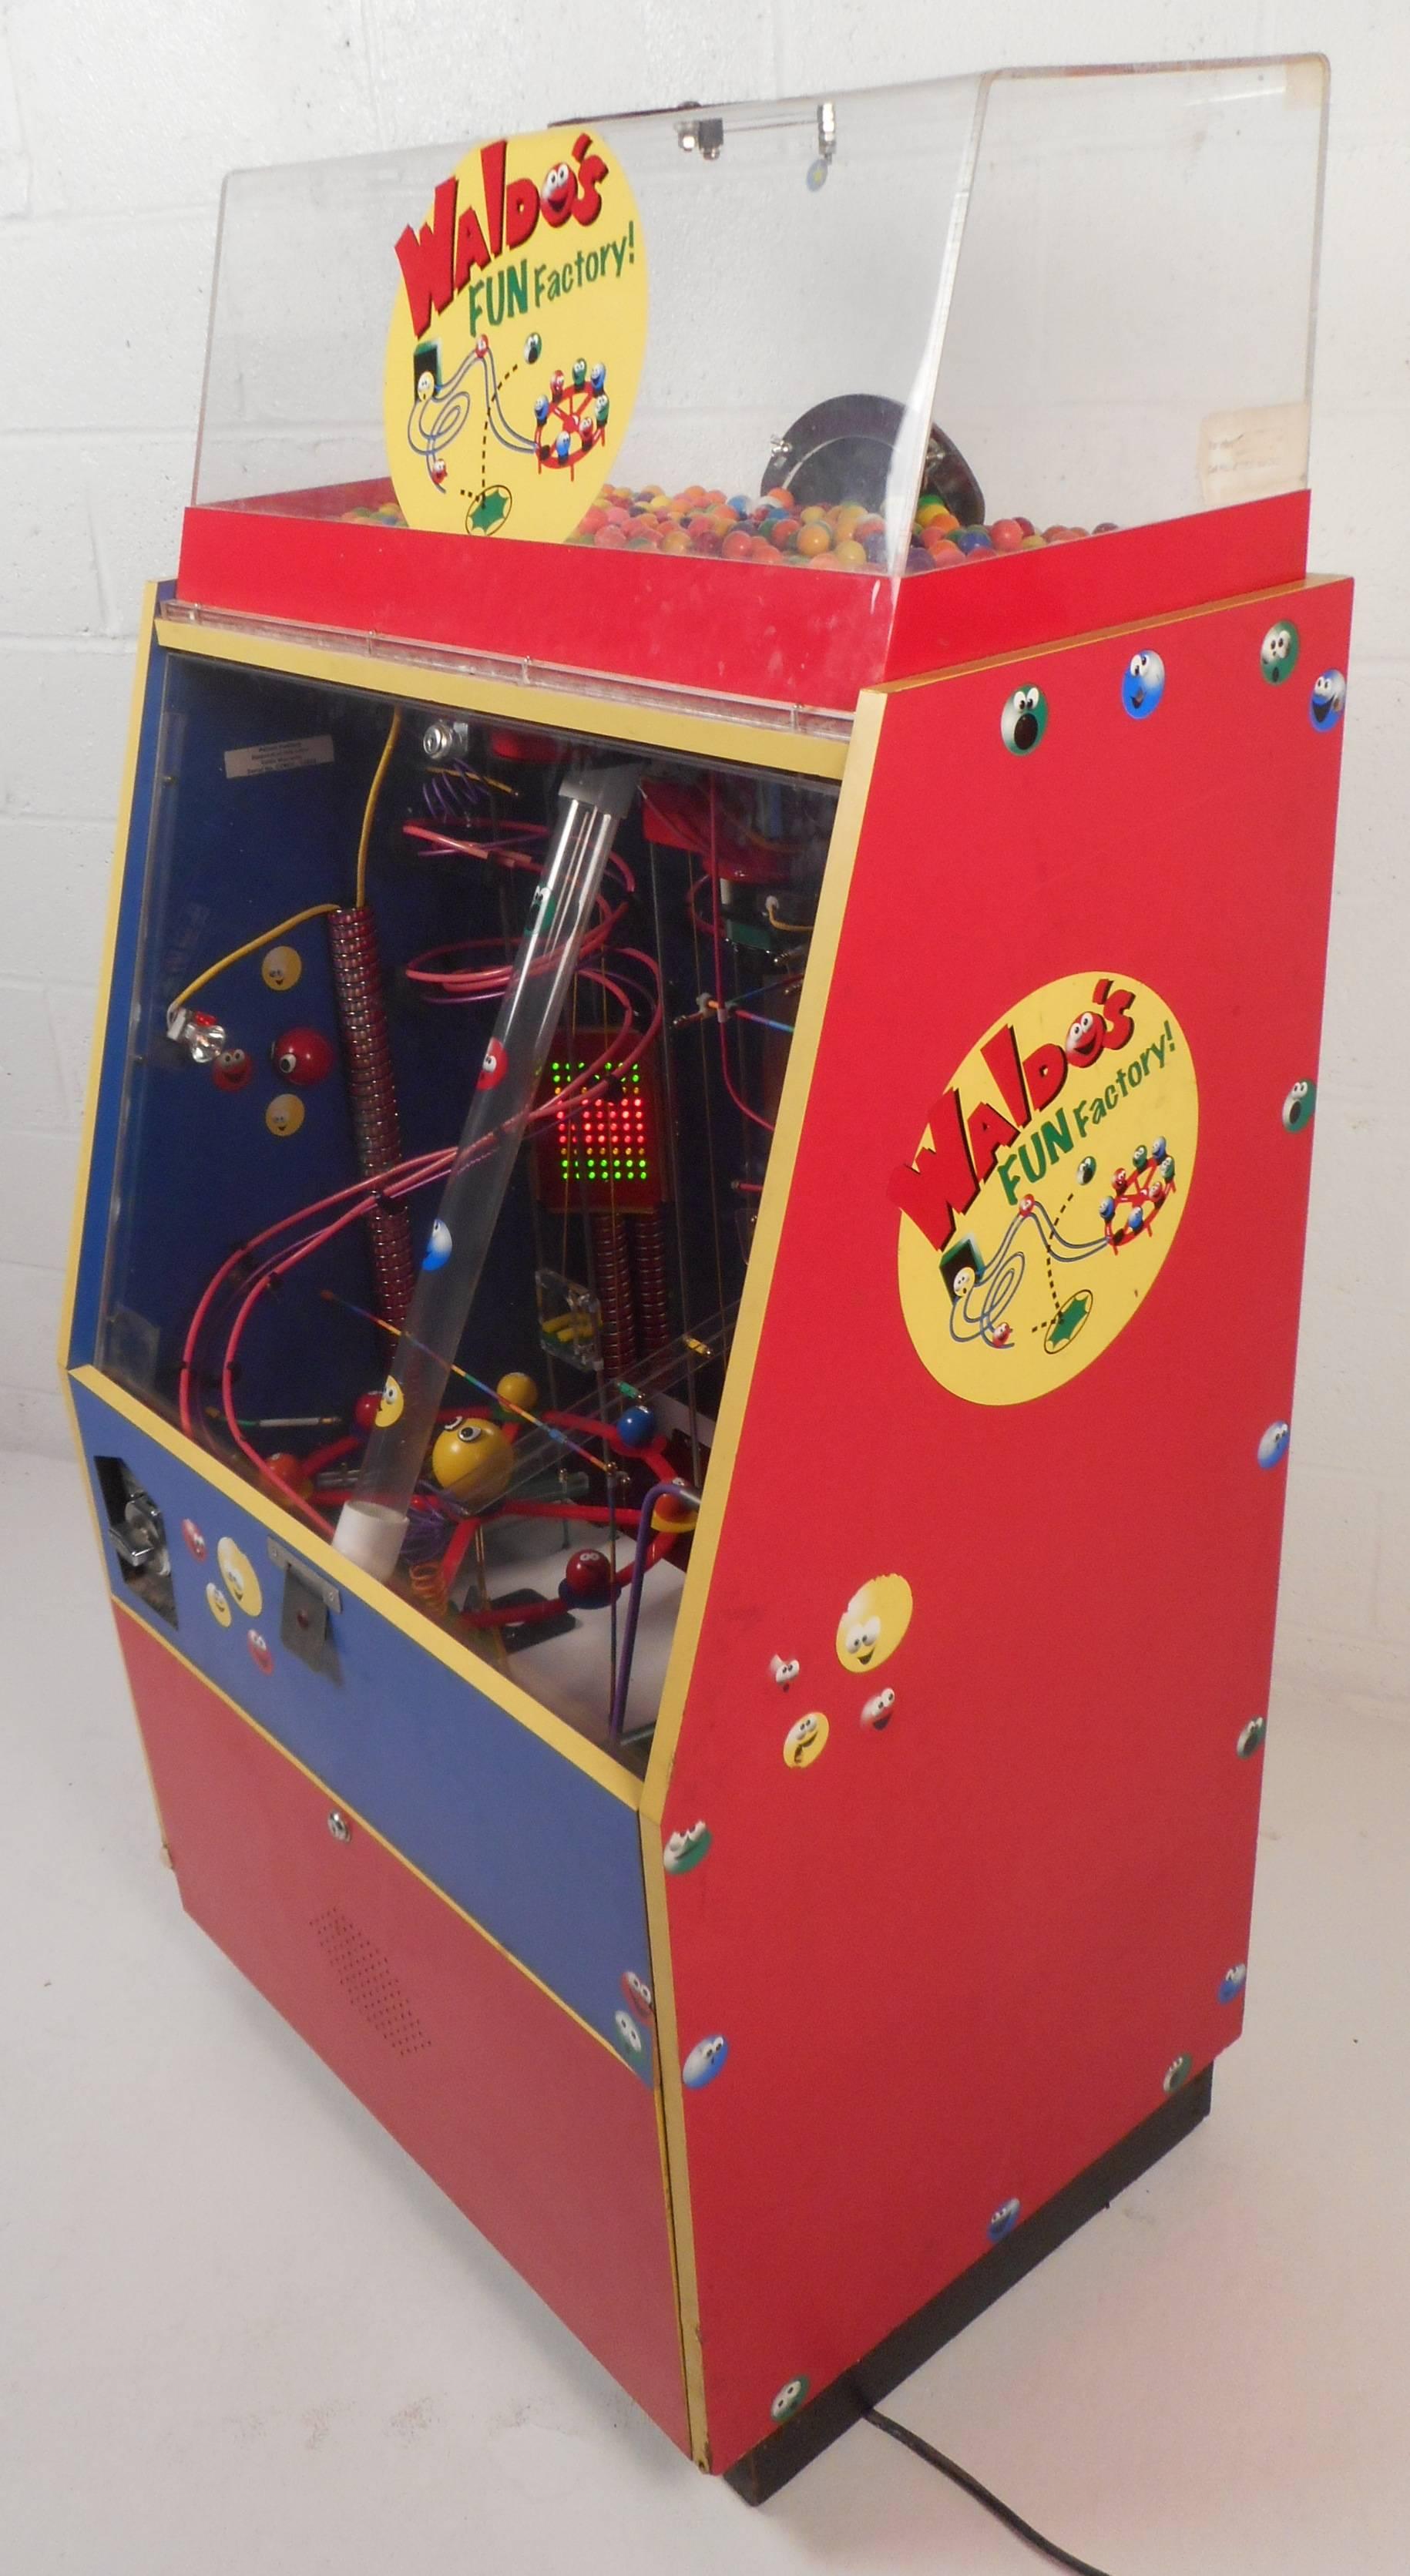 Incredible vintage gum ball machine features various bright colors and lights. Very unique and fun design offers intricate way to receive your gum ball. This quarter machine incorporates an arcade game and simple vending machine making this the